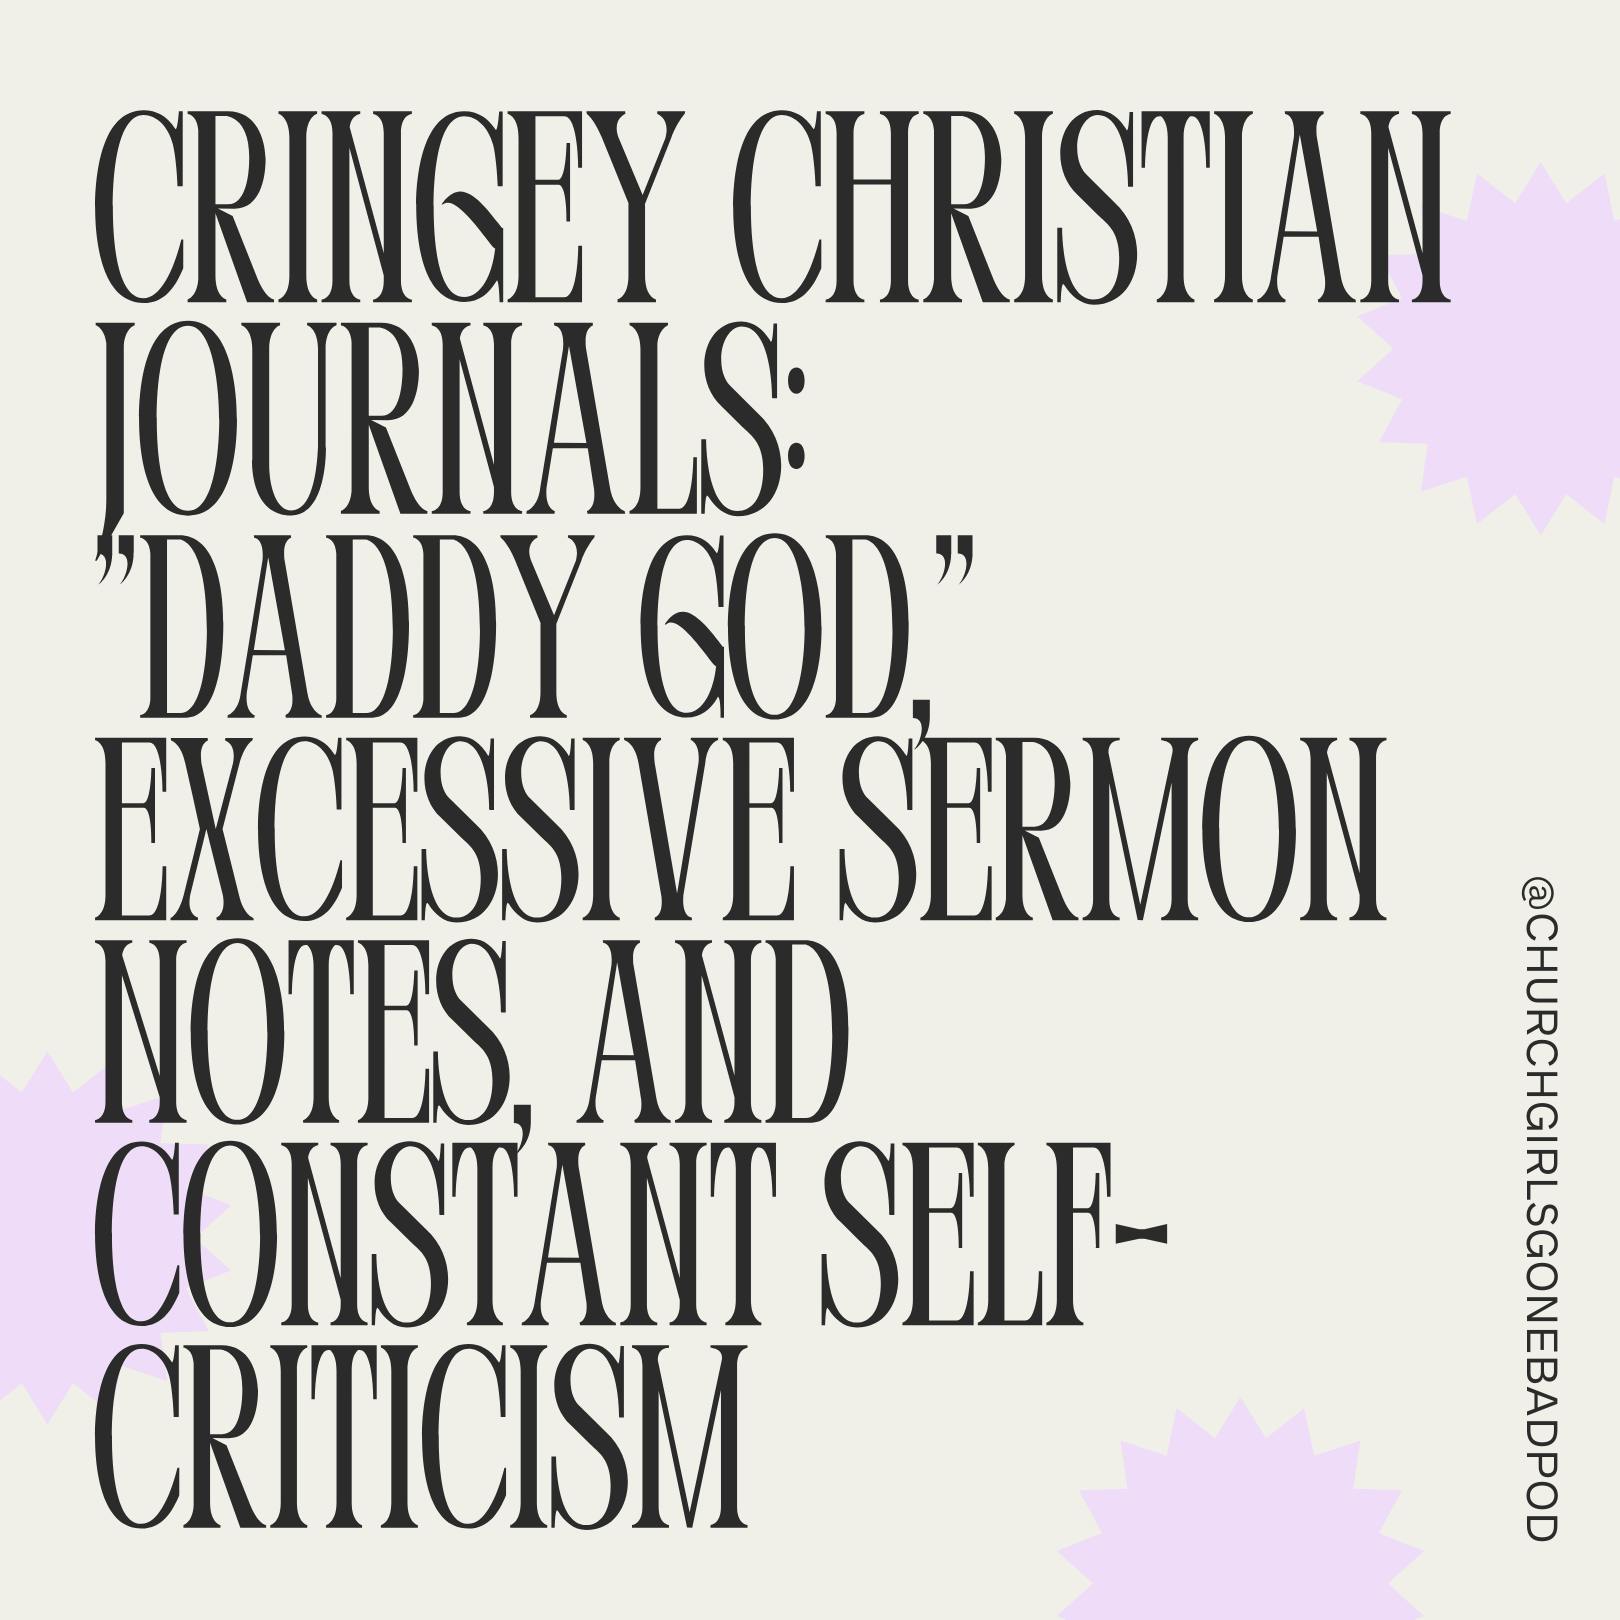 Cringey Christian Journals: "Daddy God," Excessive Sermon Notes, and Constant Self-Criticism